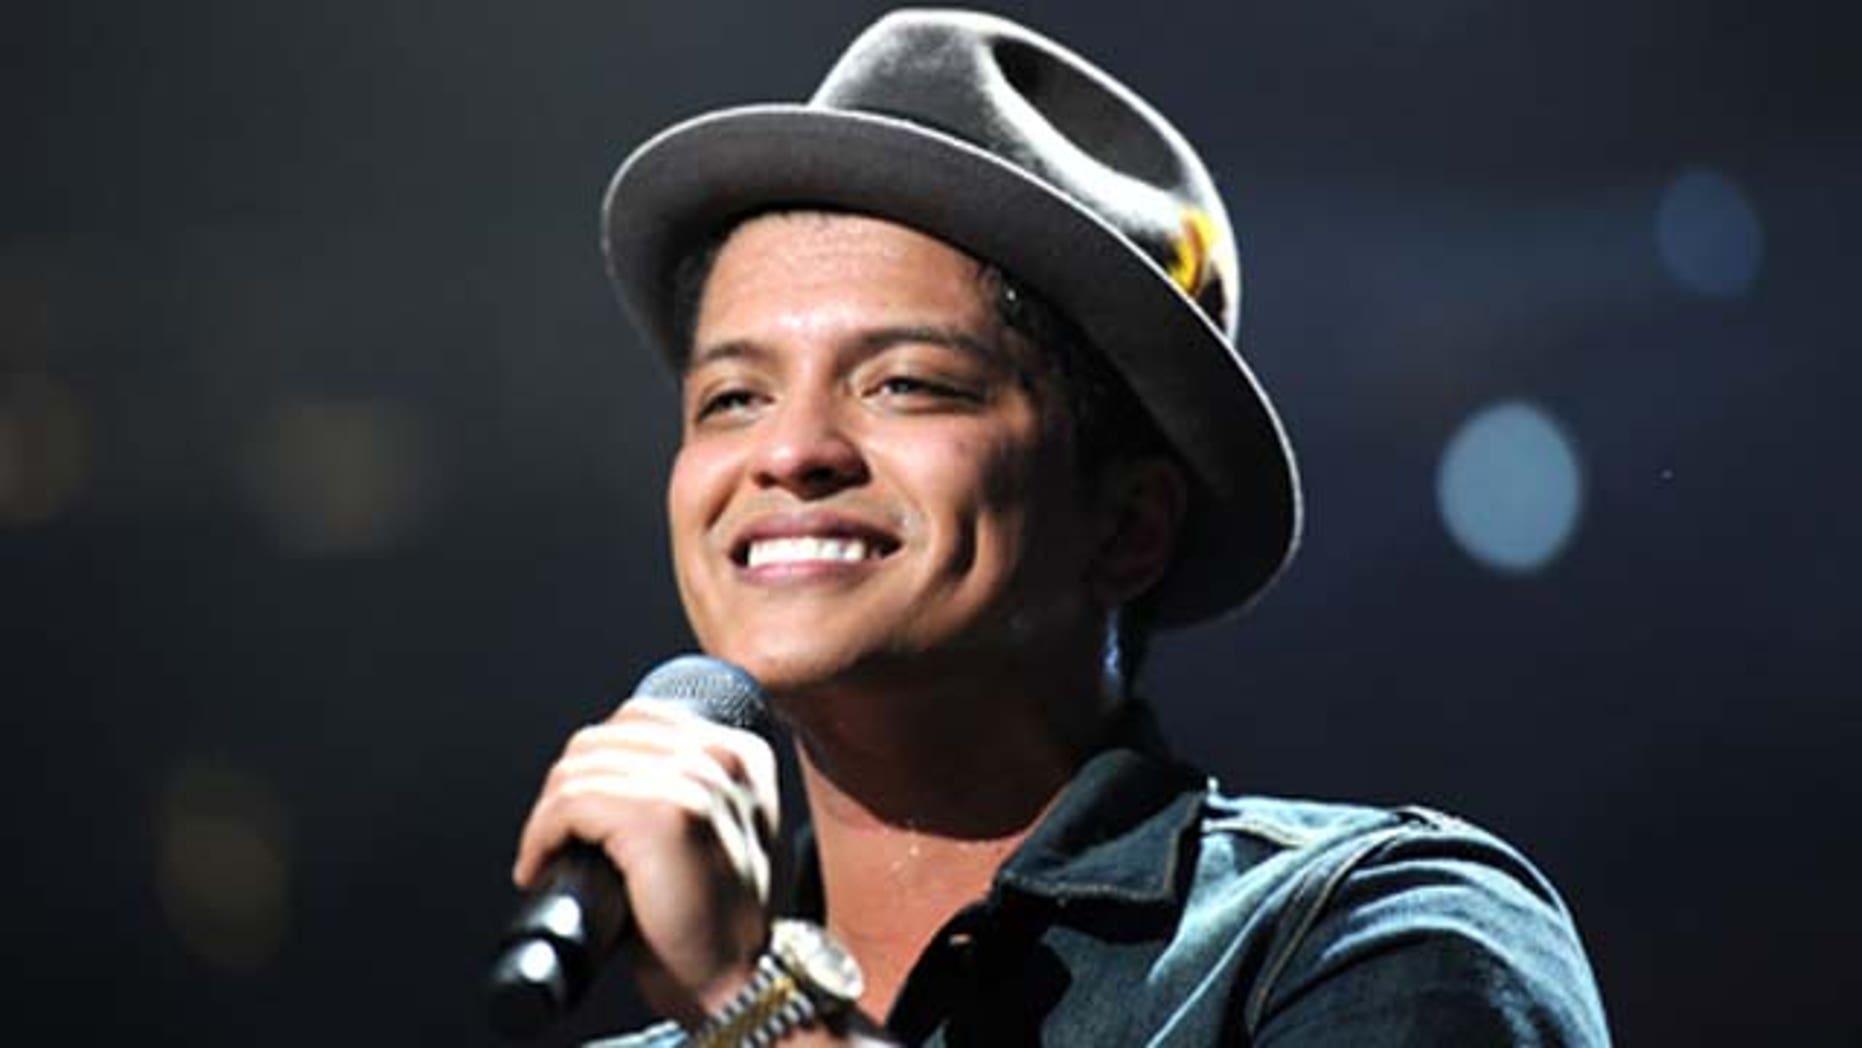 Bruno Mars announces he'll provide 24K Thanksgiving meals to the less